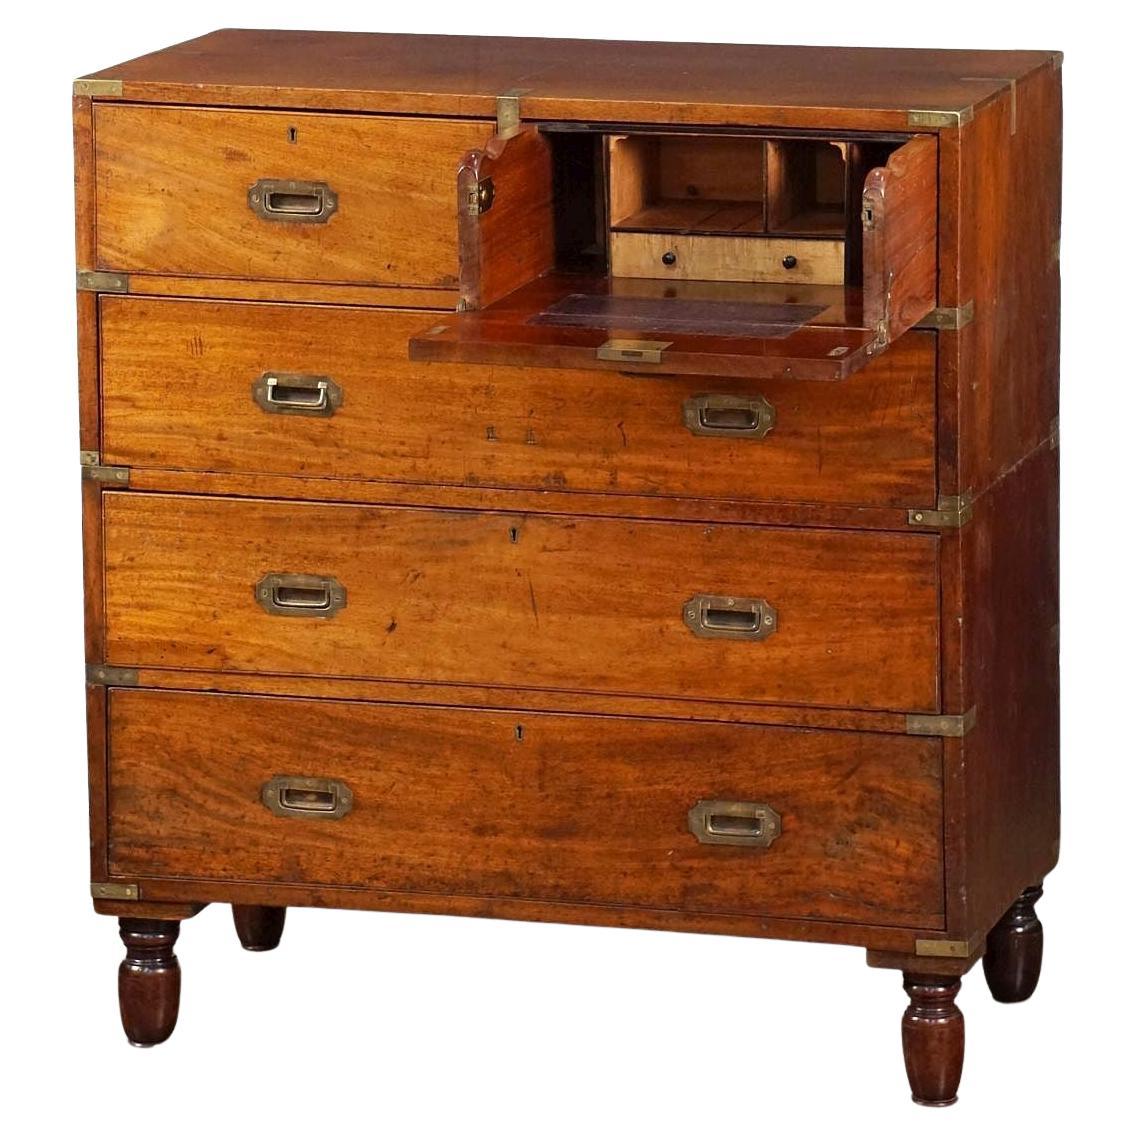 Campaign Chest Secretary of Brass-Bound Mahogany for British Military Officer